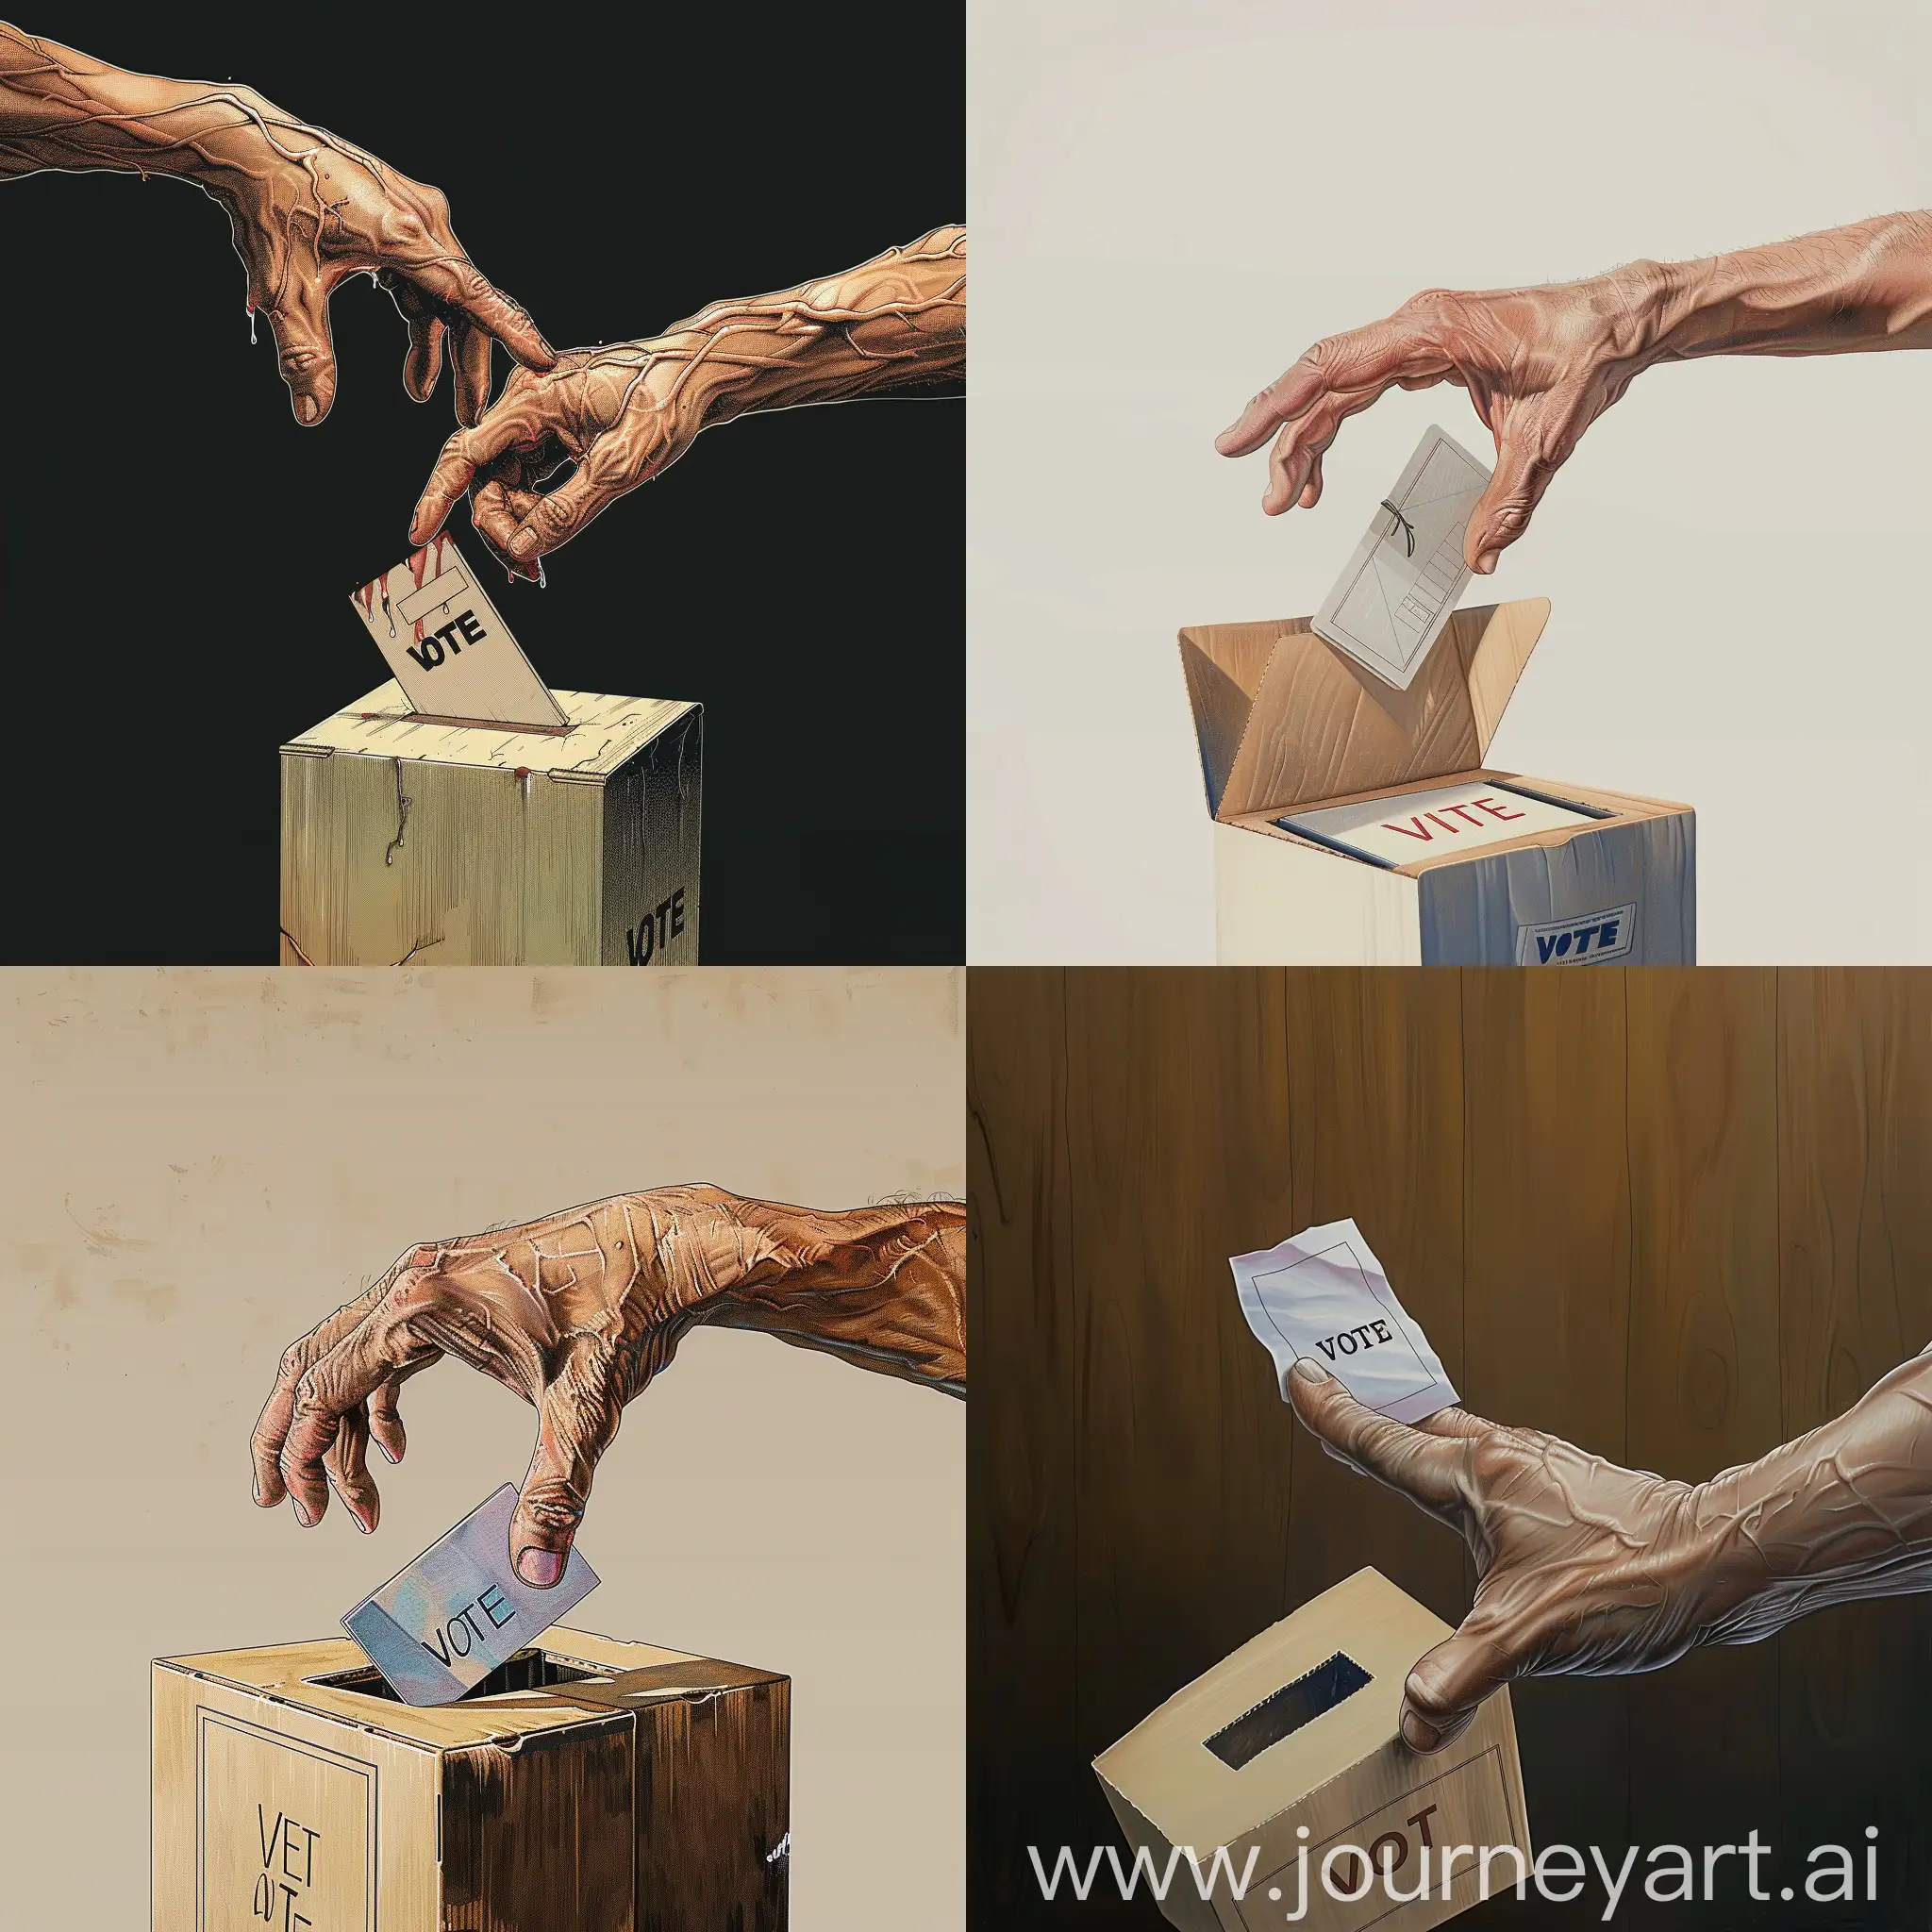 Voting-Concept-Hand-Reaching-for-Ballot-with-VOTE-Box